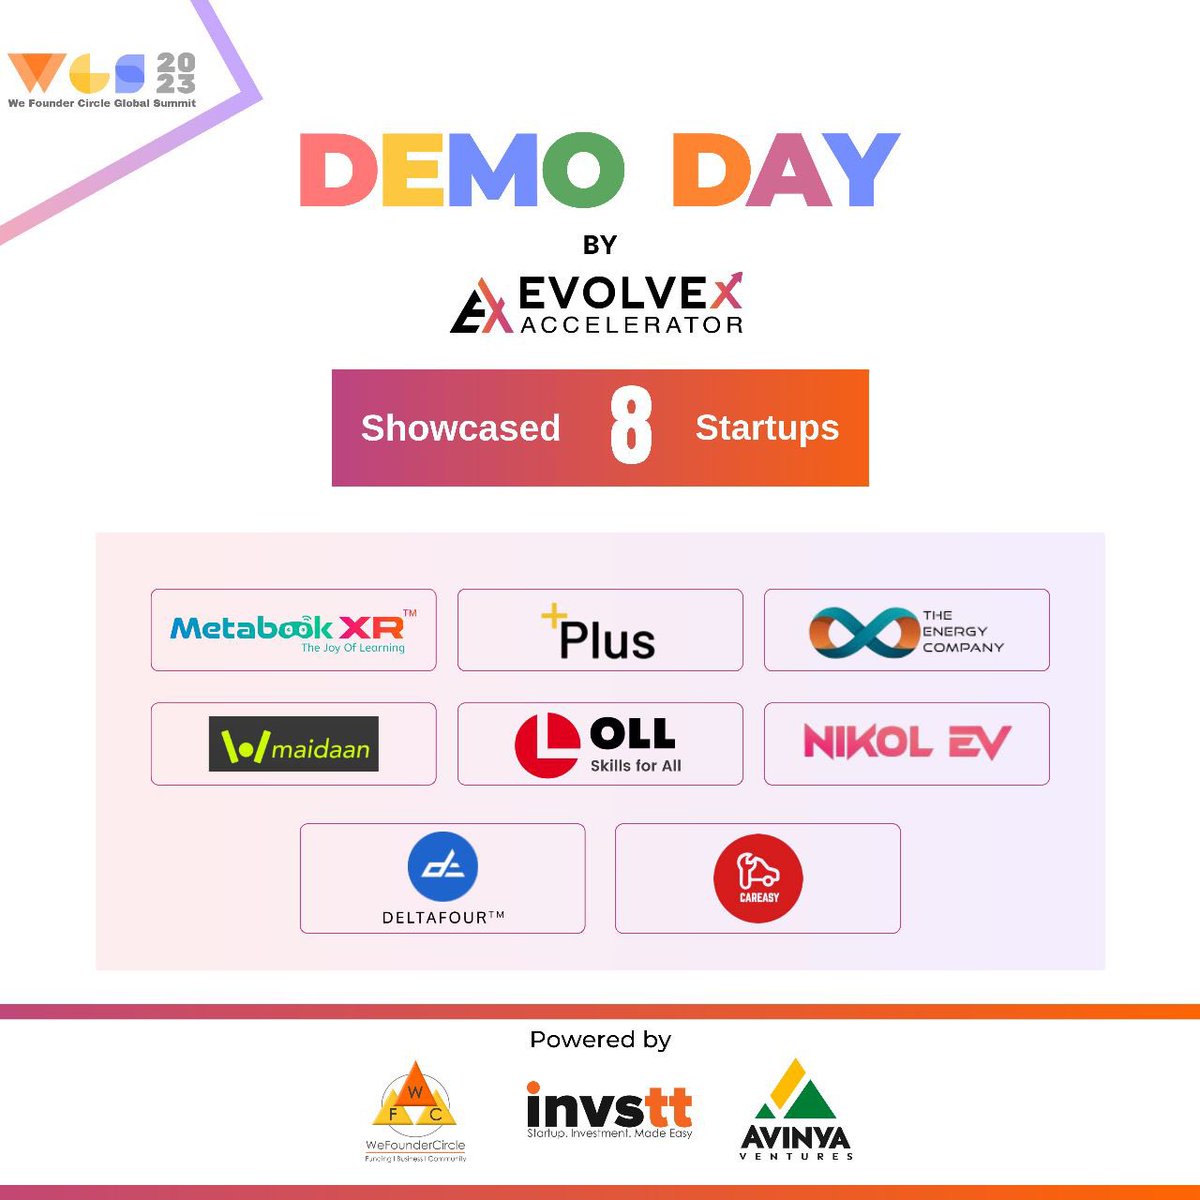 EvolveX Cohort Startups at WGS’23: Securing Funding and Making an Global Impact.

#EvolveX #DemoDay #Innovation #StartupSuccess #Funding #WGS2023 #Cohorts #Globalimpact #Community #VC’s #VP’s #CXO’s #WFC23 #Startups #Globalsubmit